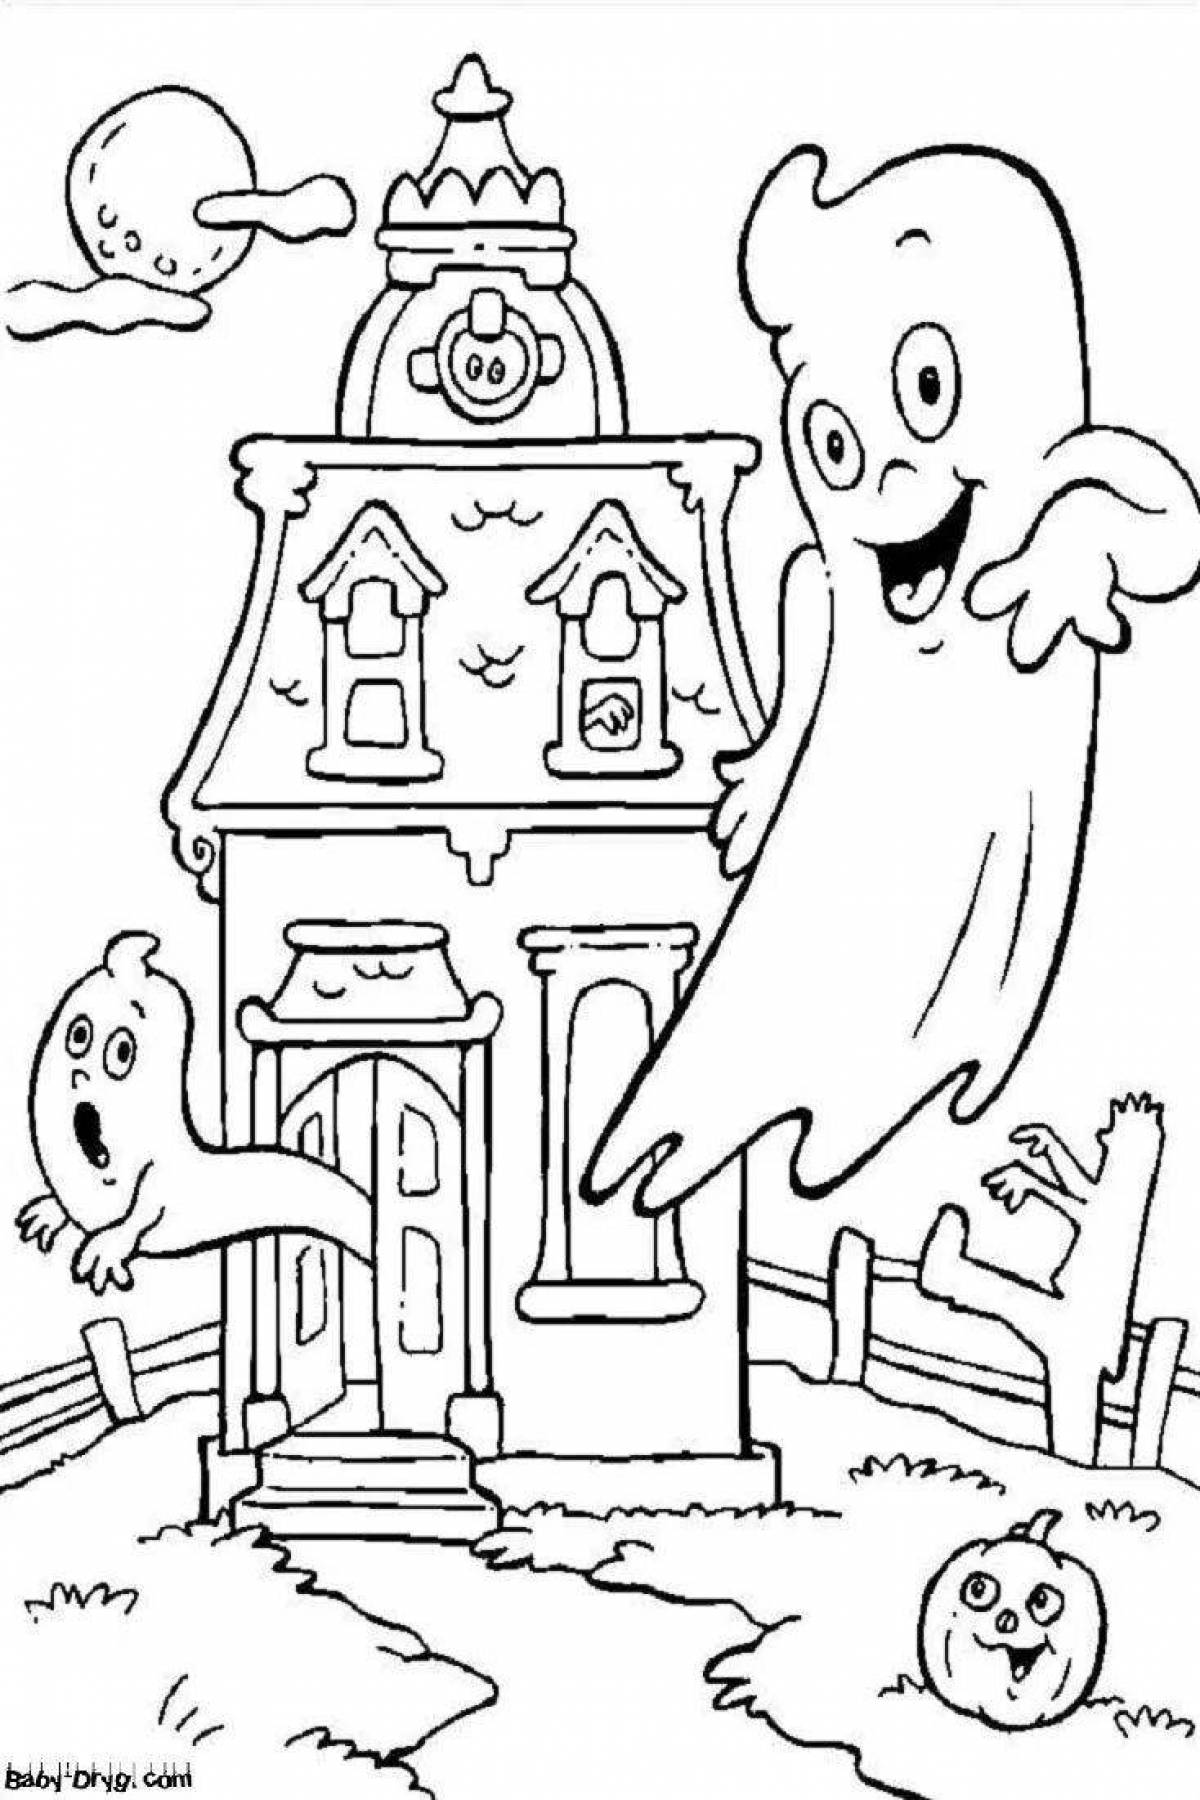 Mystical ghost coloring page